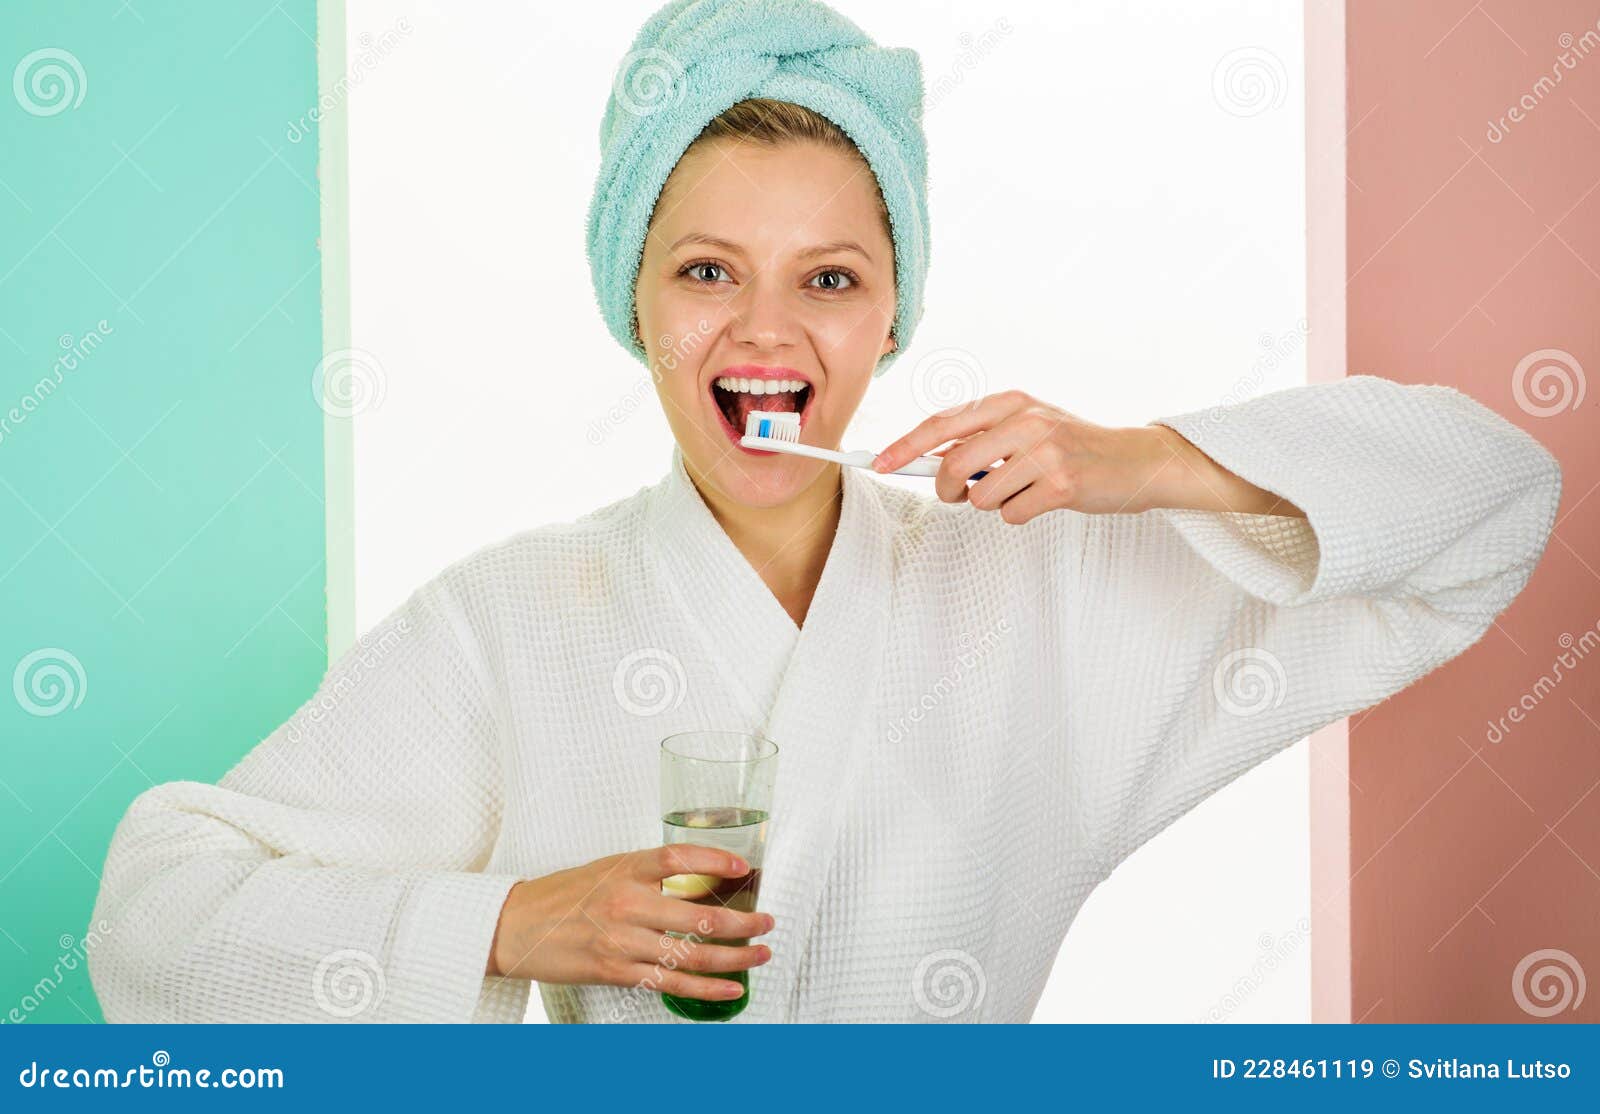 happy woman cleaning teeth with toothbrush and toothpaste. whitening teeth. oral care. dental higiene. morning